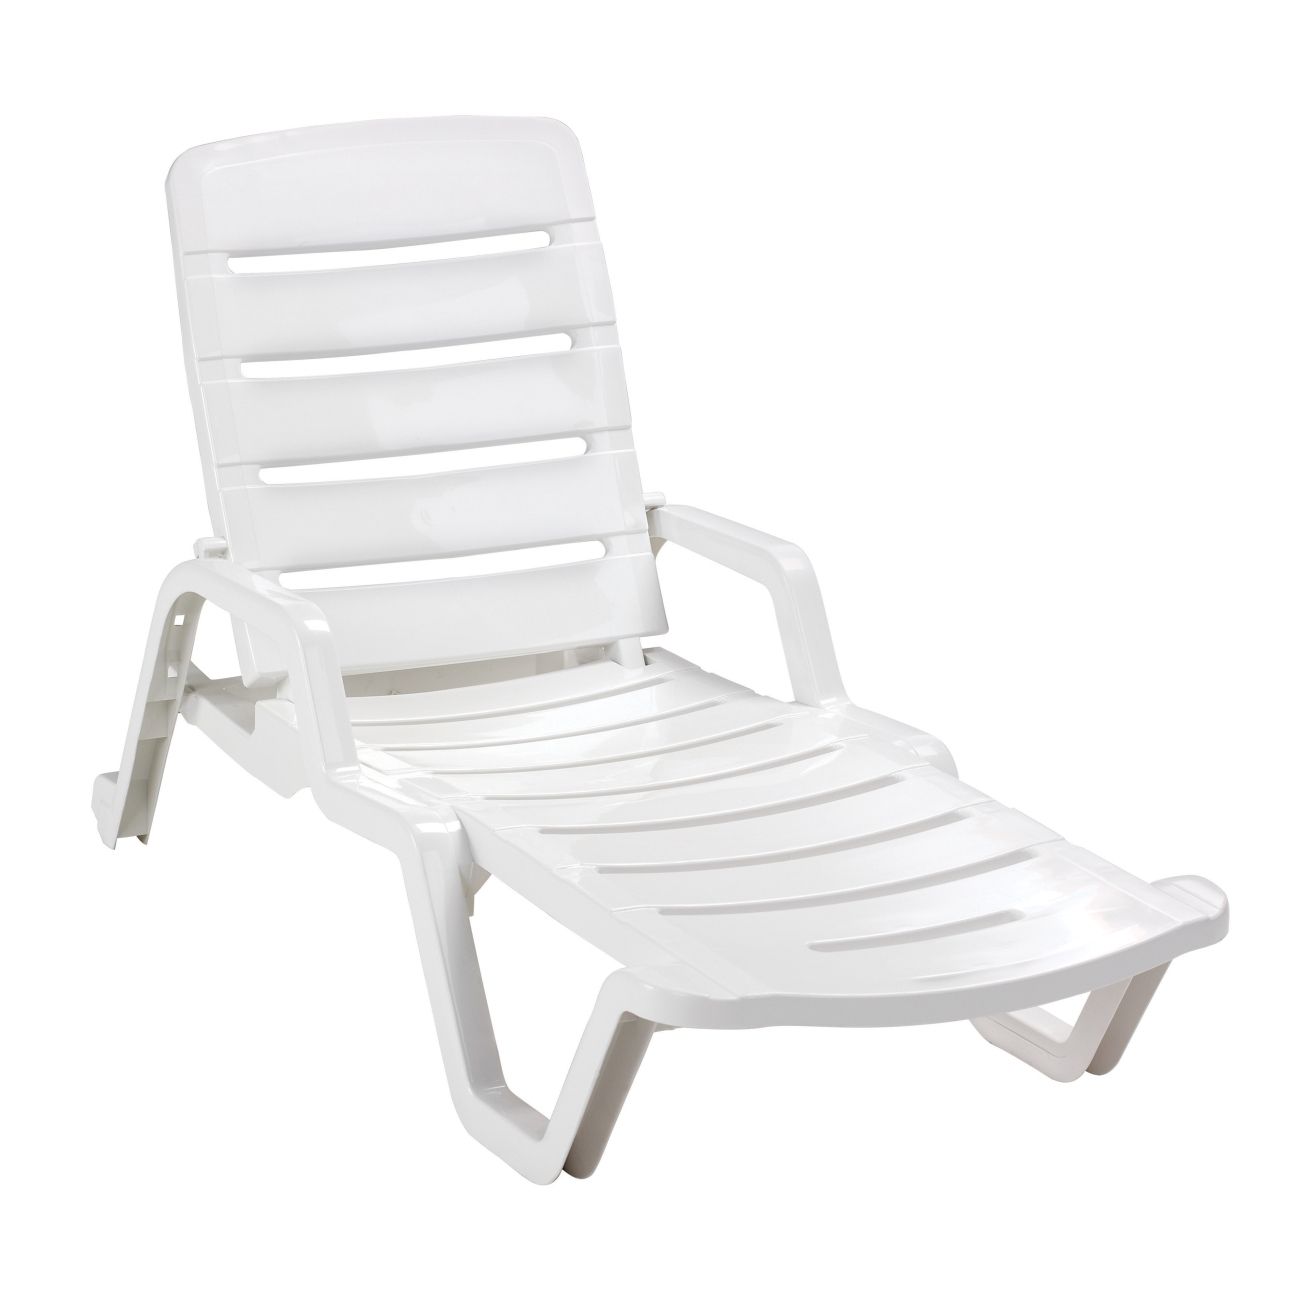 Outdoor Lounge Chairs, Patio & Pool Lounge Chairs At Ace Hardware In Most Popular Pvc Chaise Lounges (View 6 of 15)